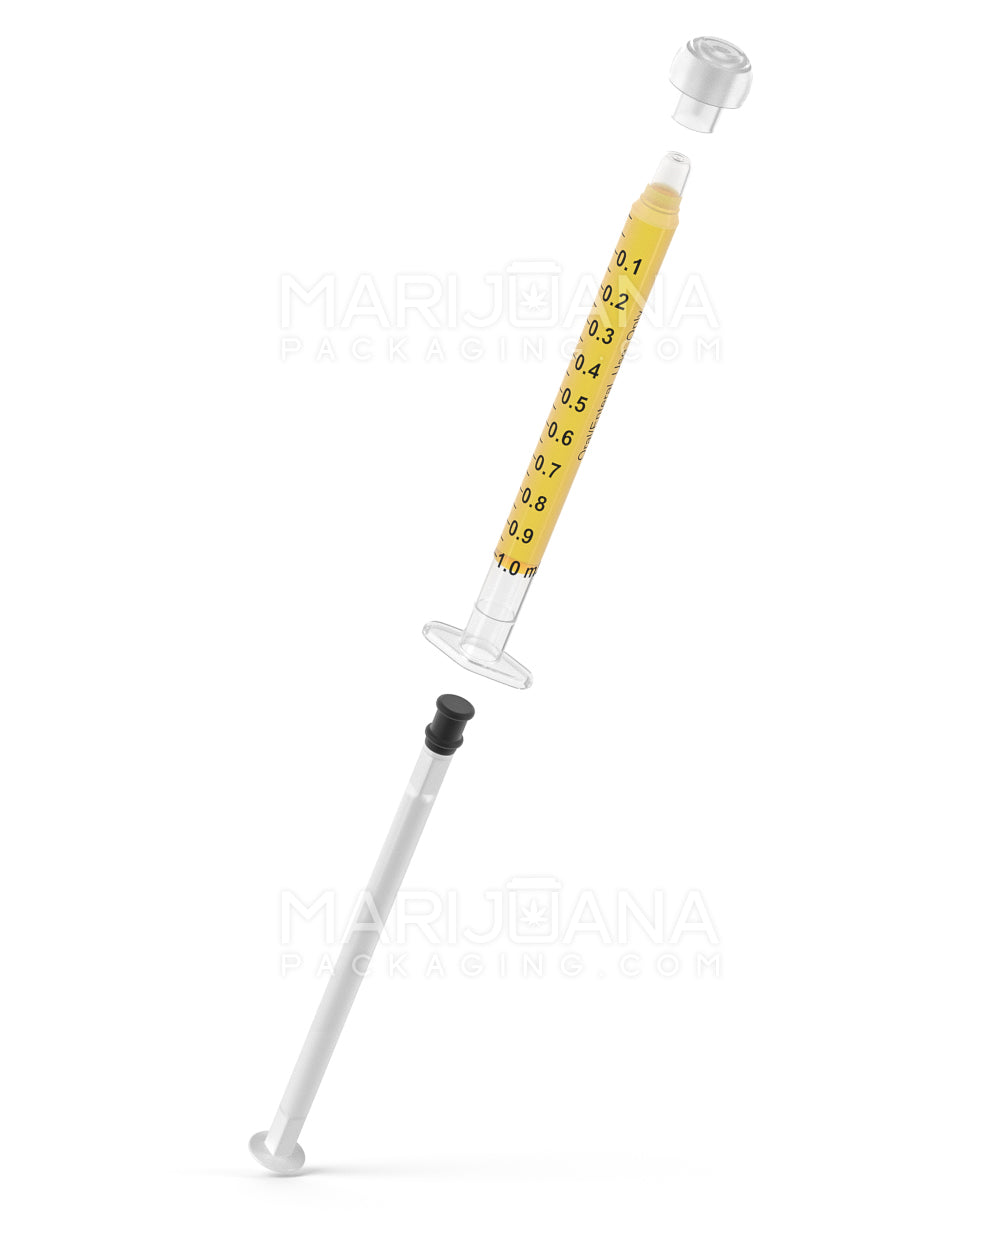 Plastic Oral Concentrate Syringes | 1mL - 0.1mL Increments | Sample - 7